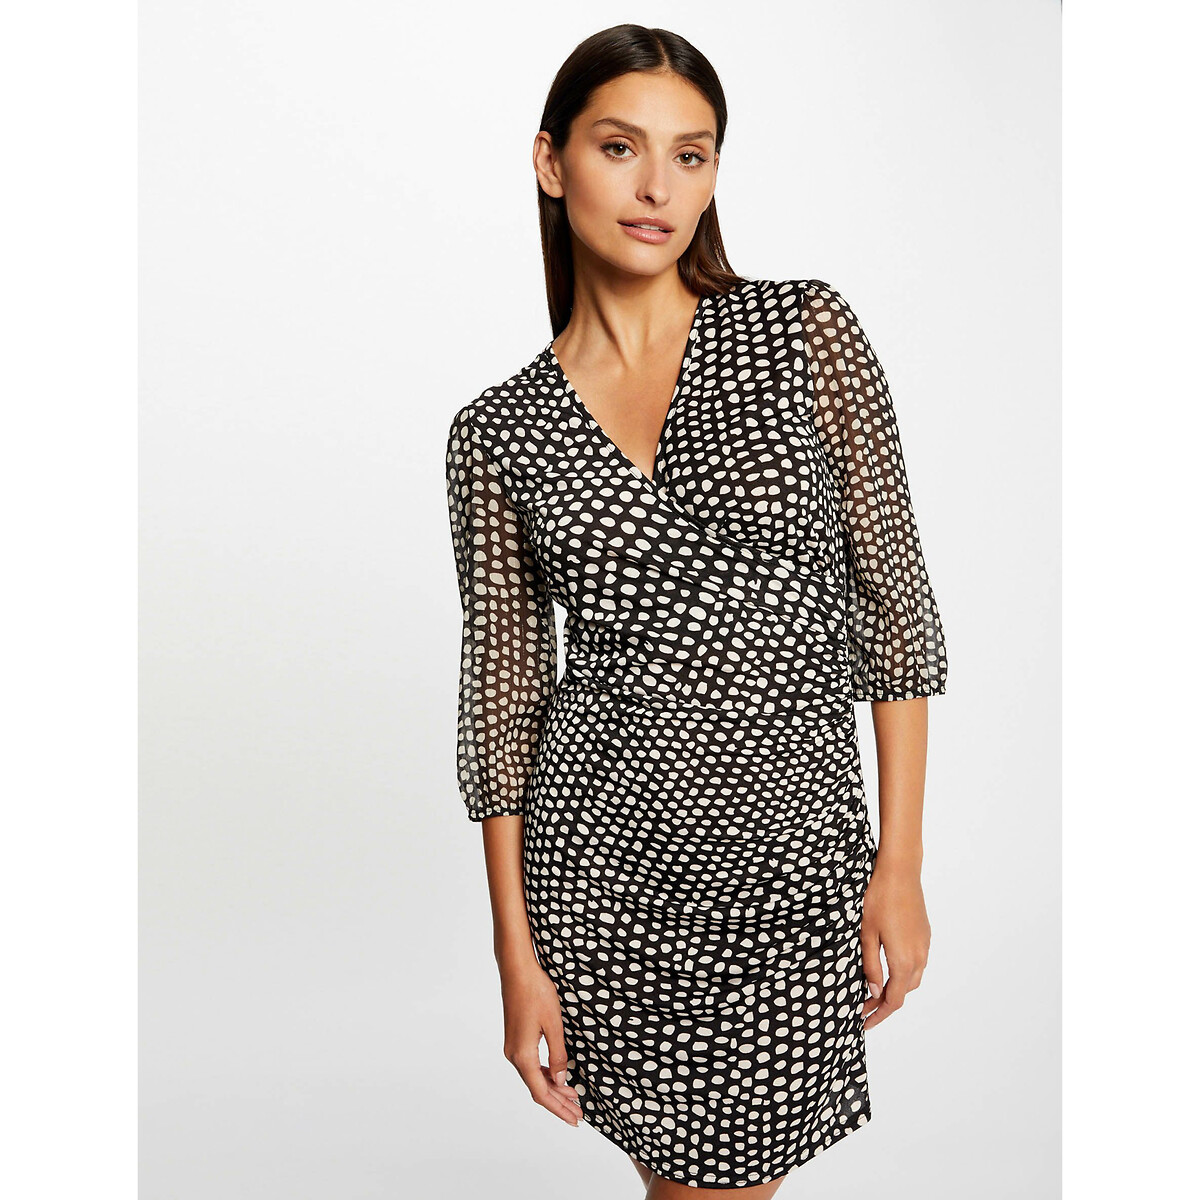 Image of Bodycon Mini Dress in Polka Dot Print with Short Sleeves